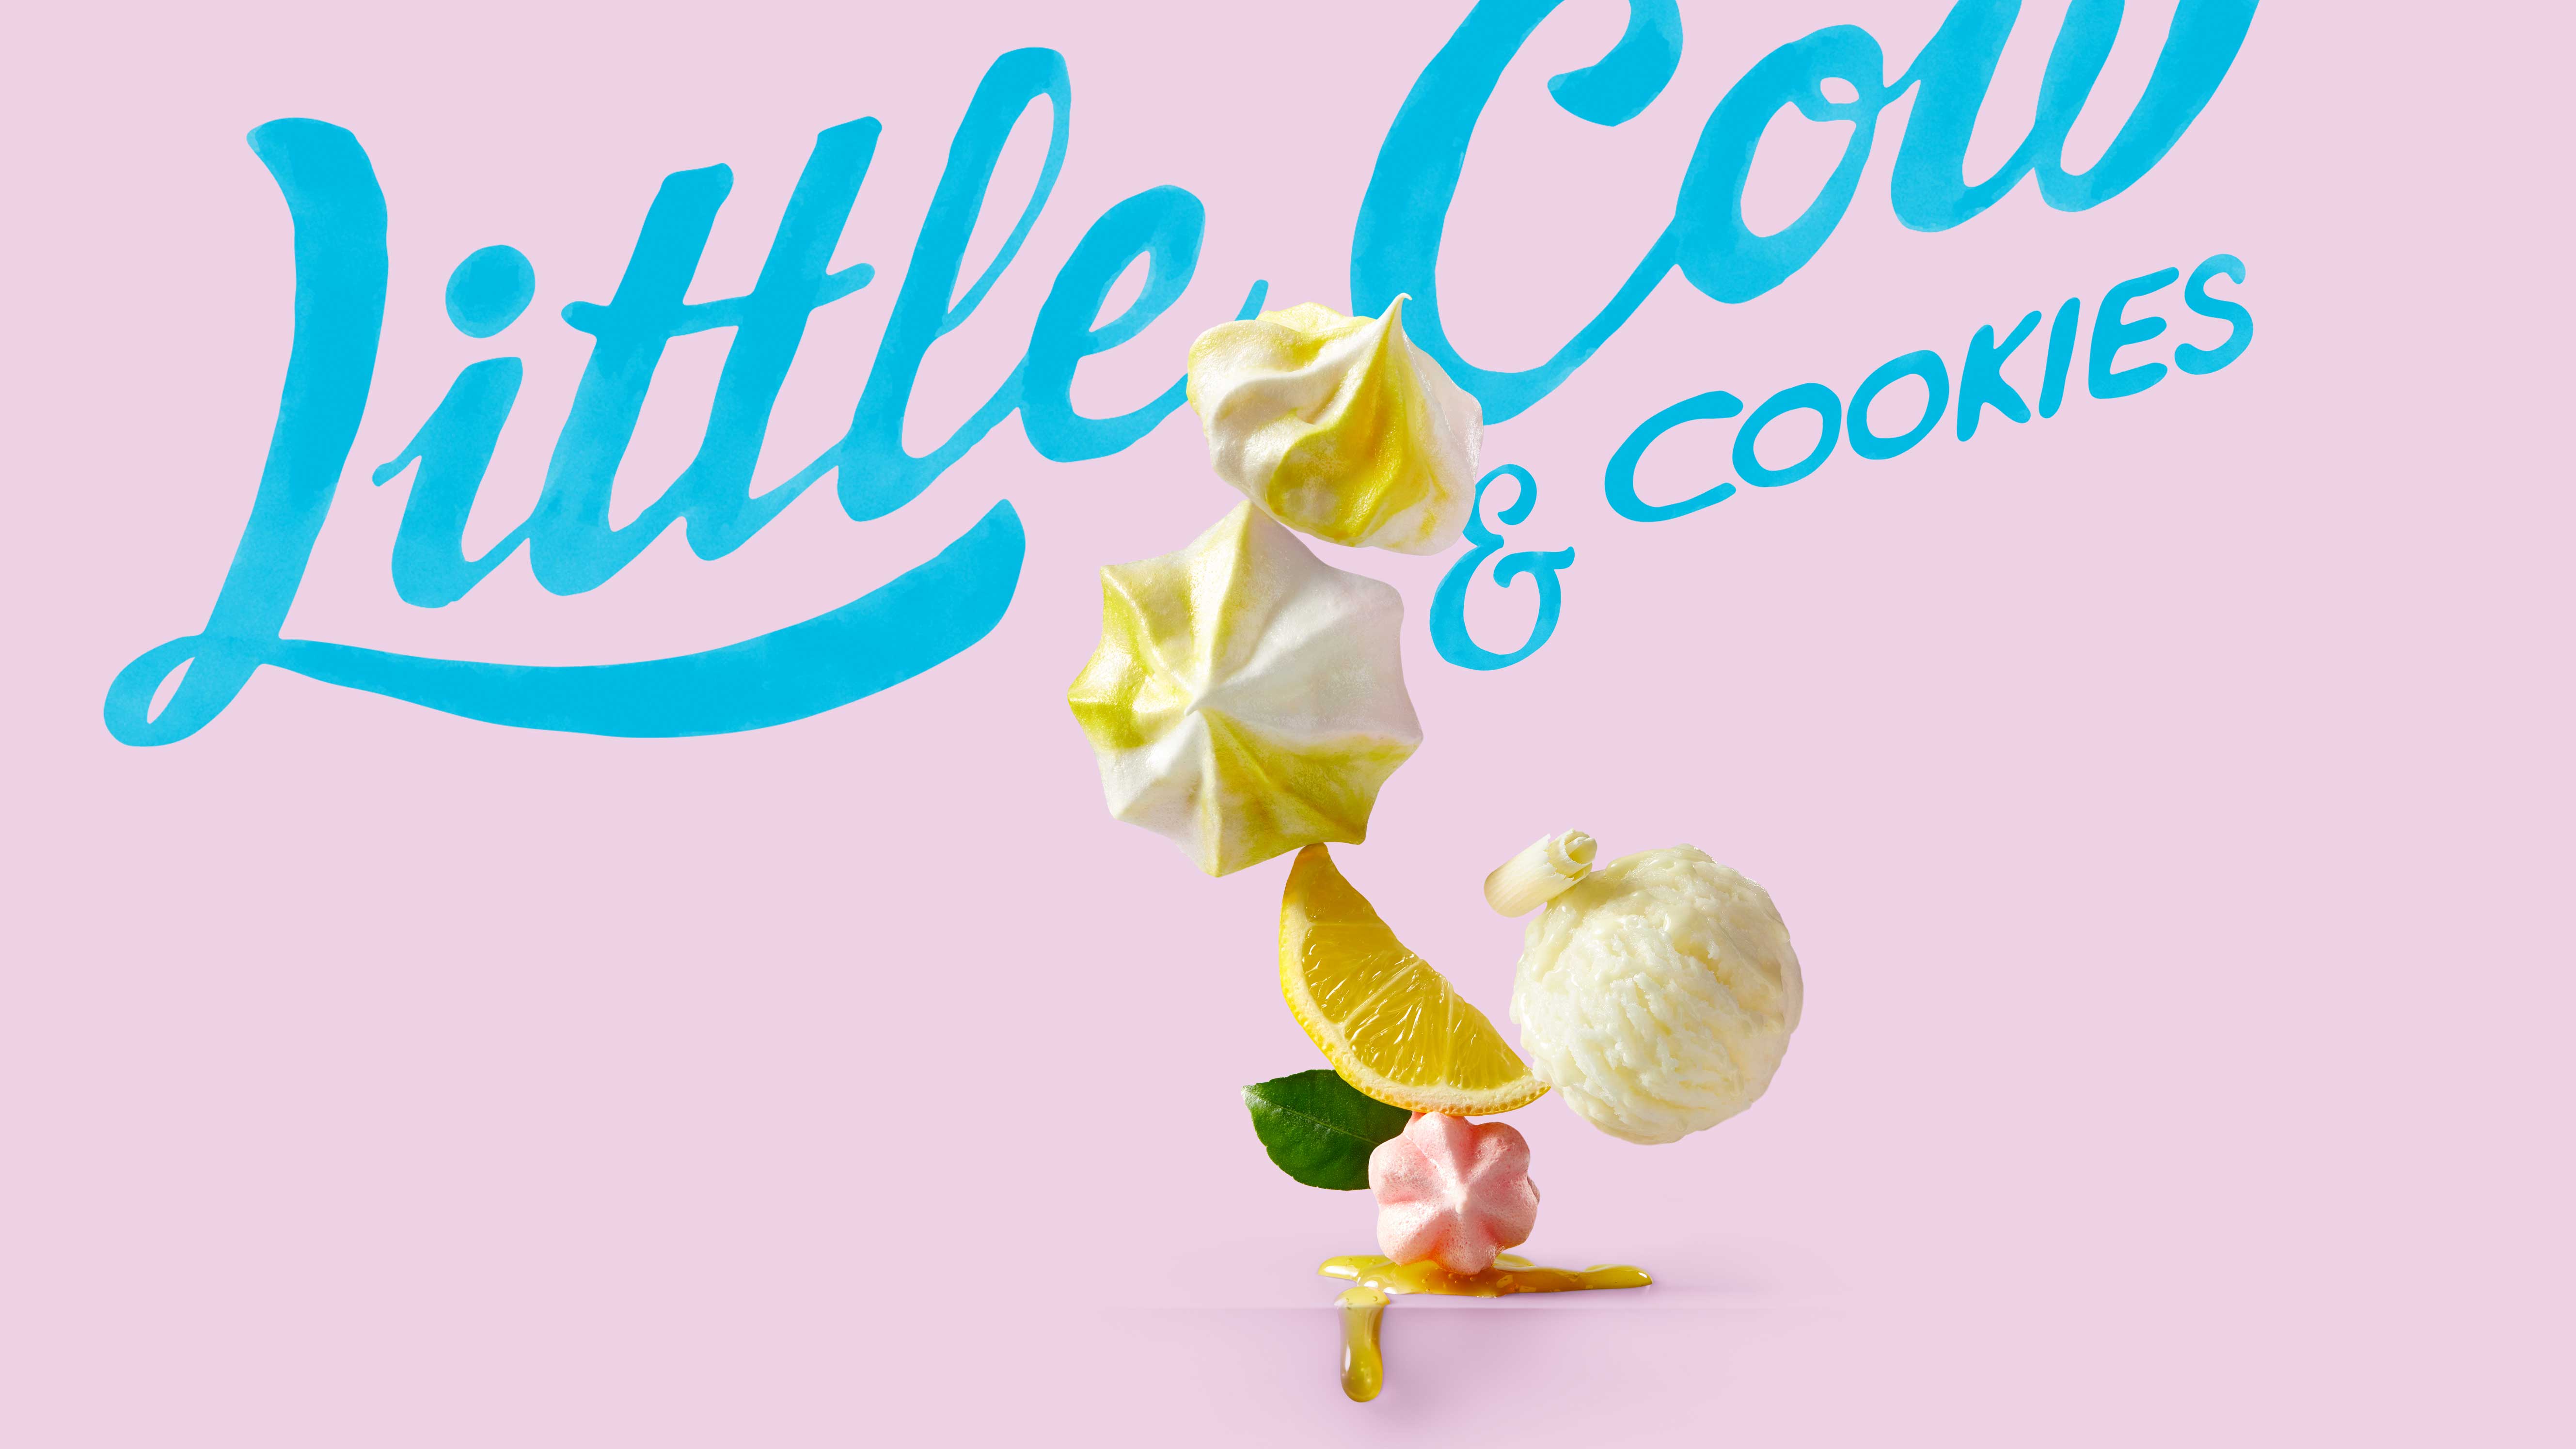 Packaging Design Of Little Cow & Cookies By Snow Donuts